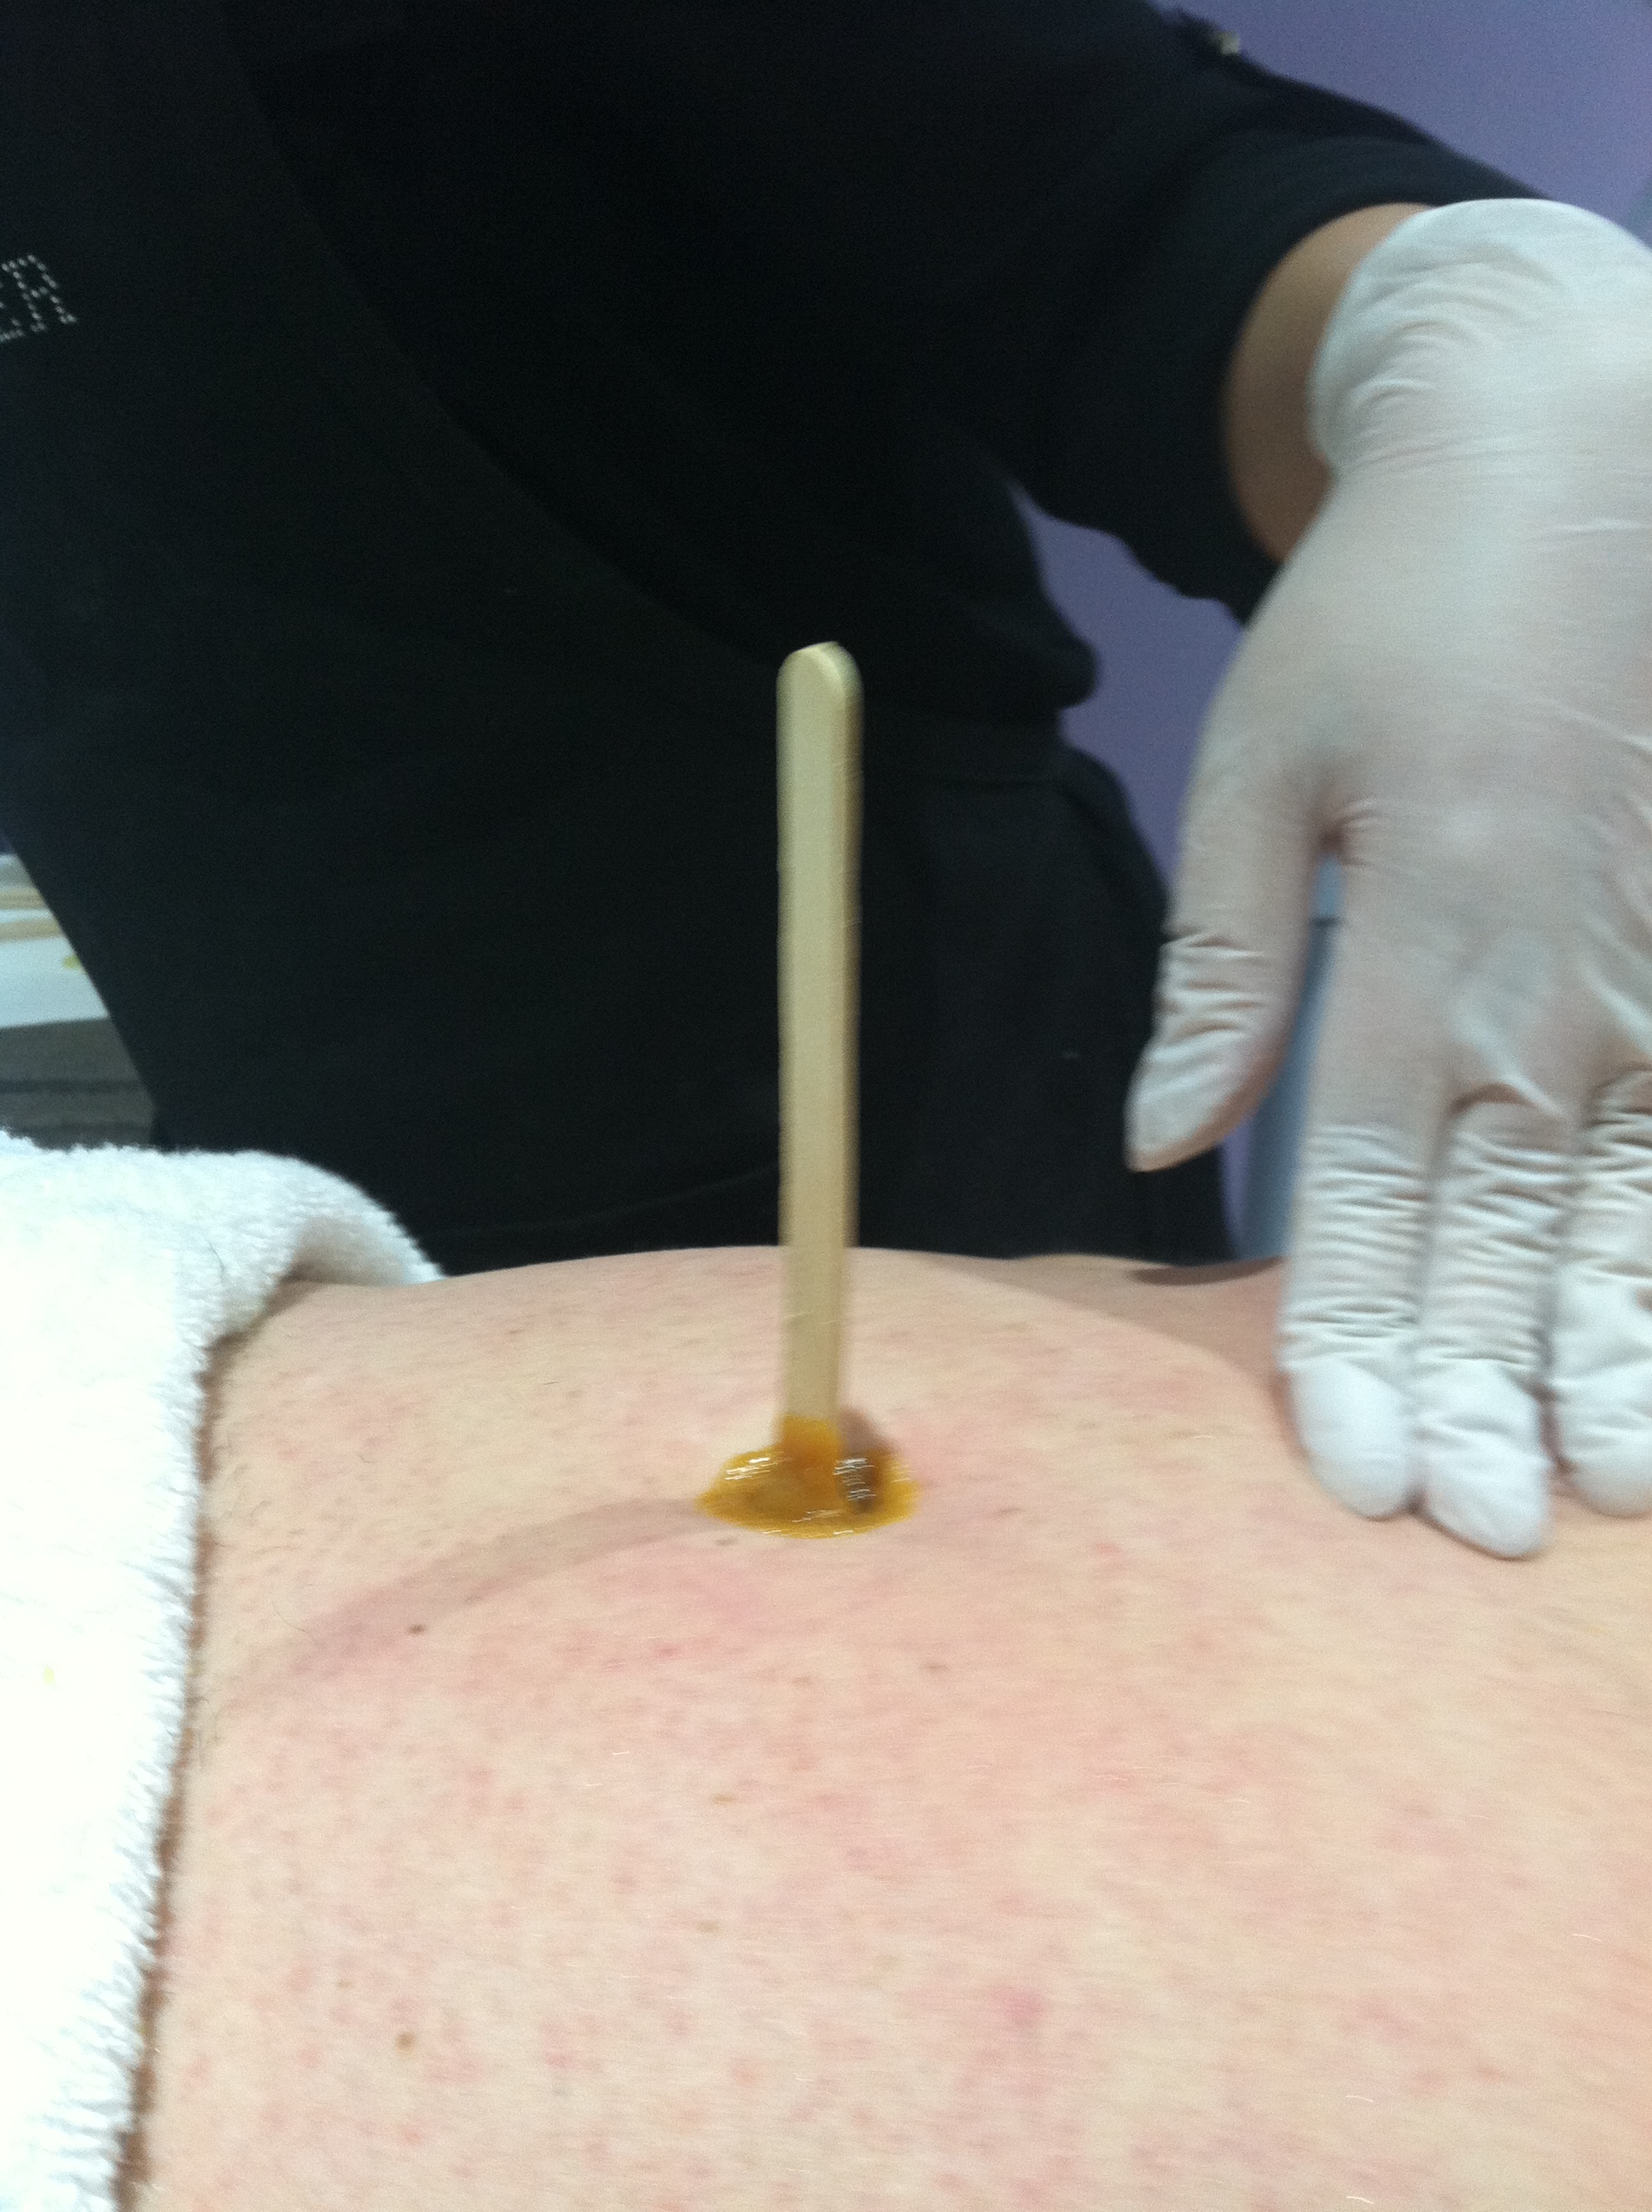 belly button waxing during waxing class | Brit of Wax and Facials